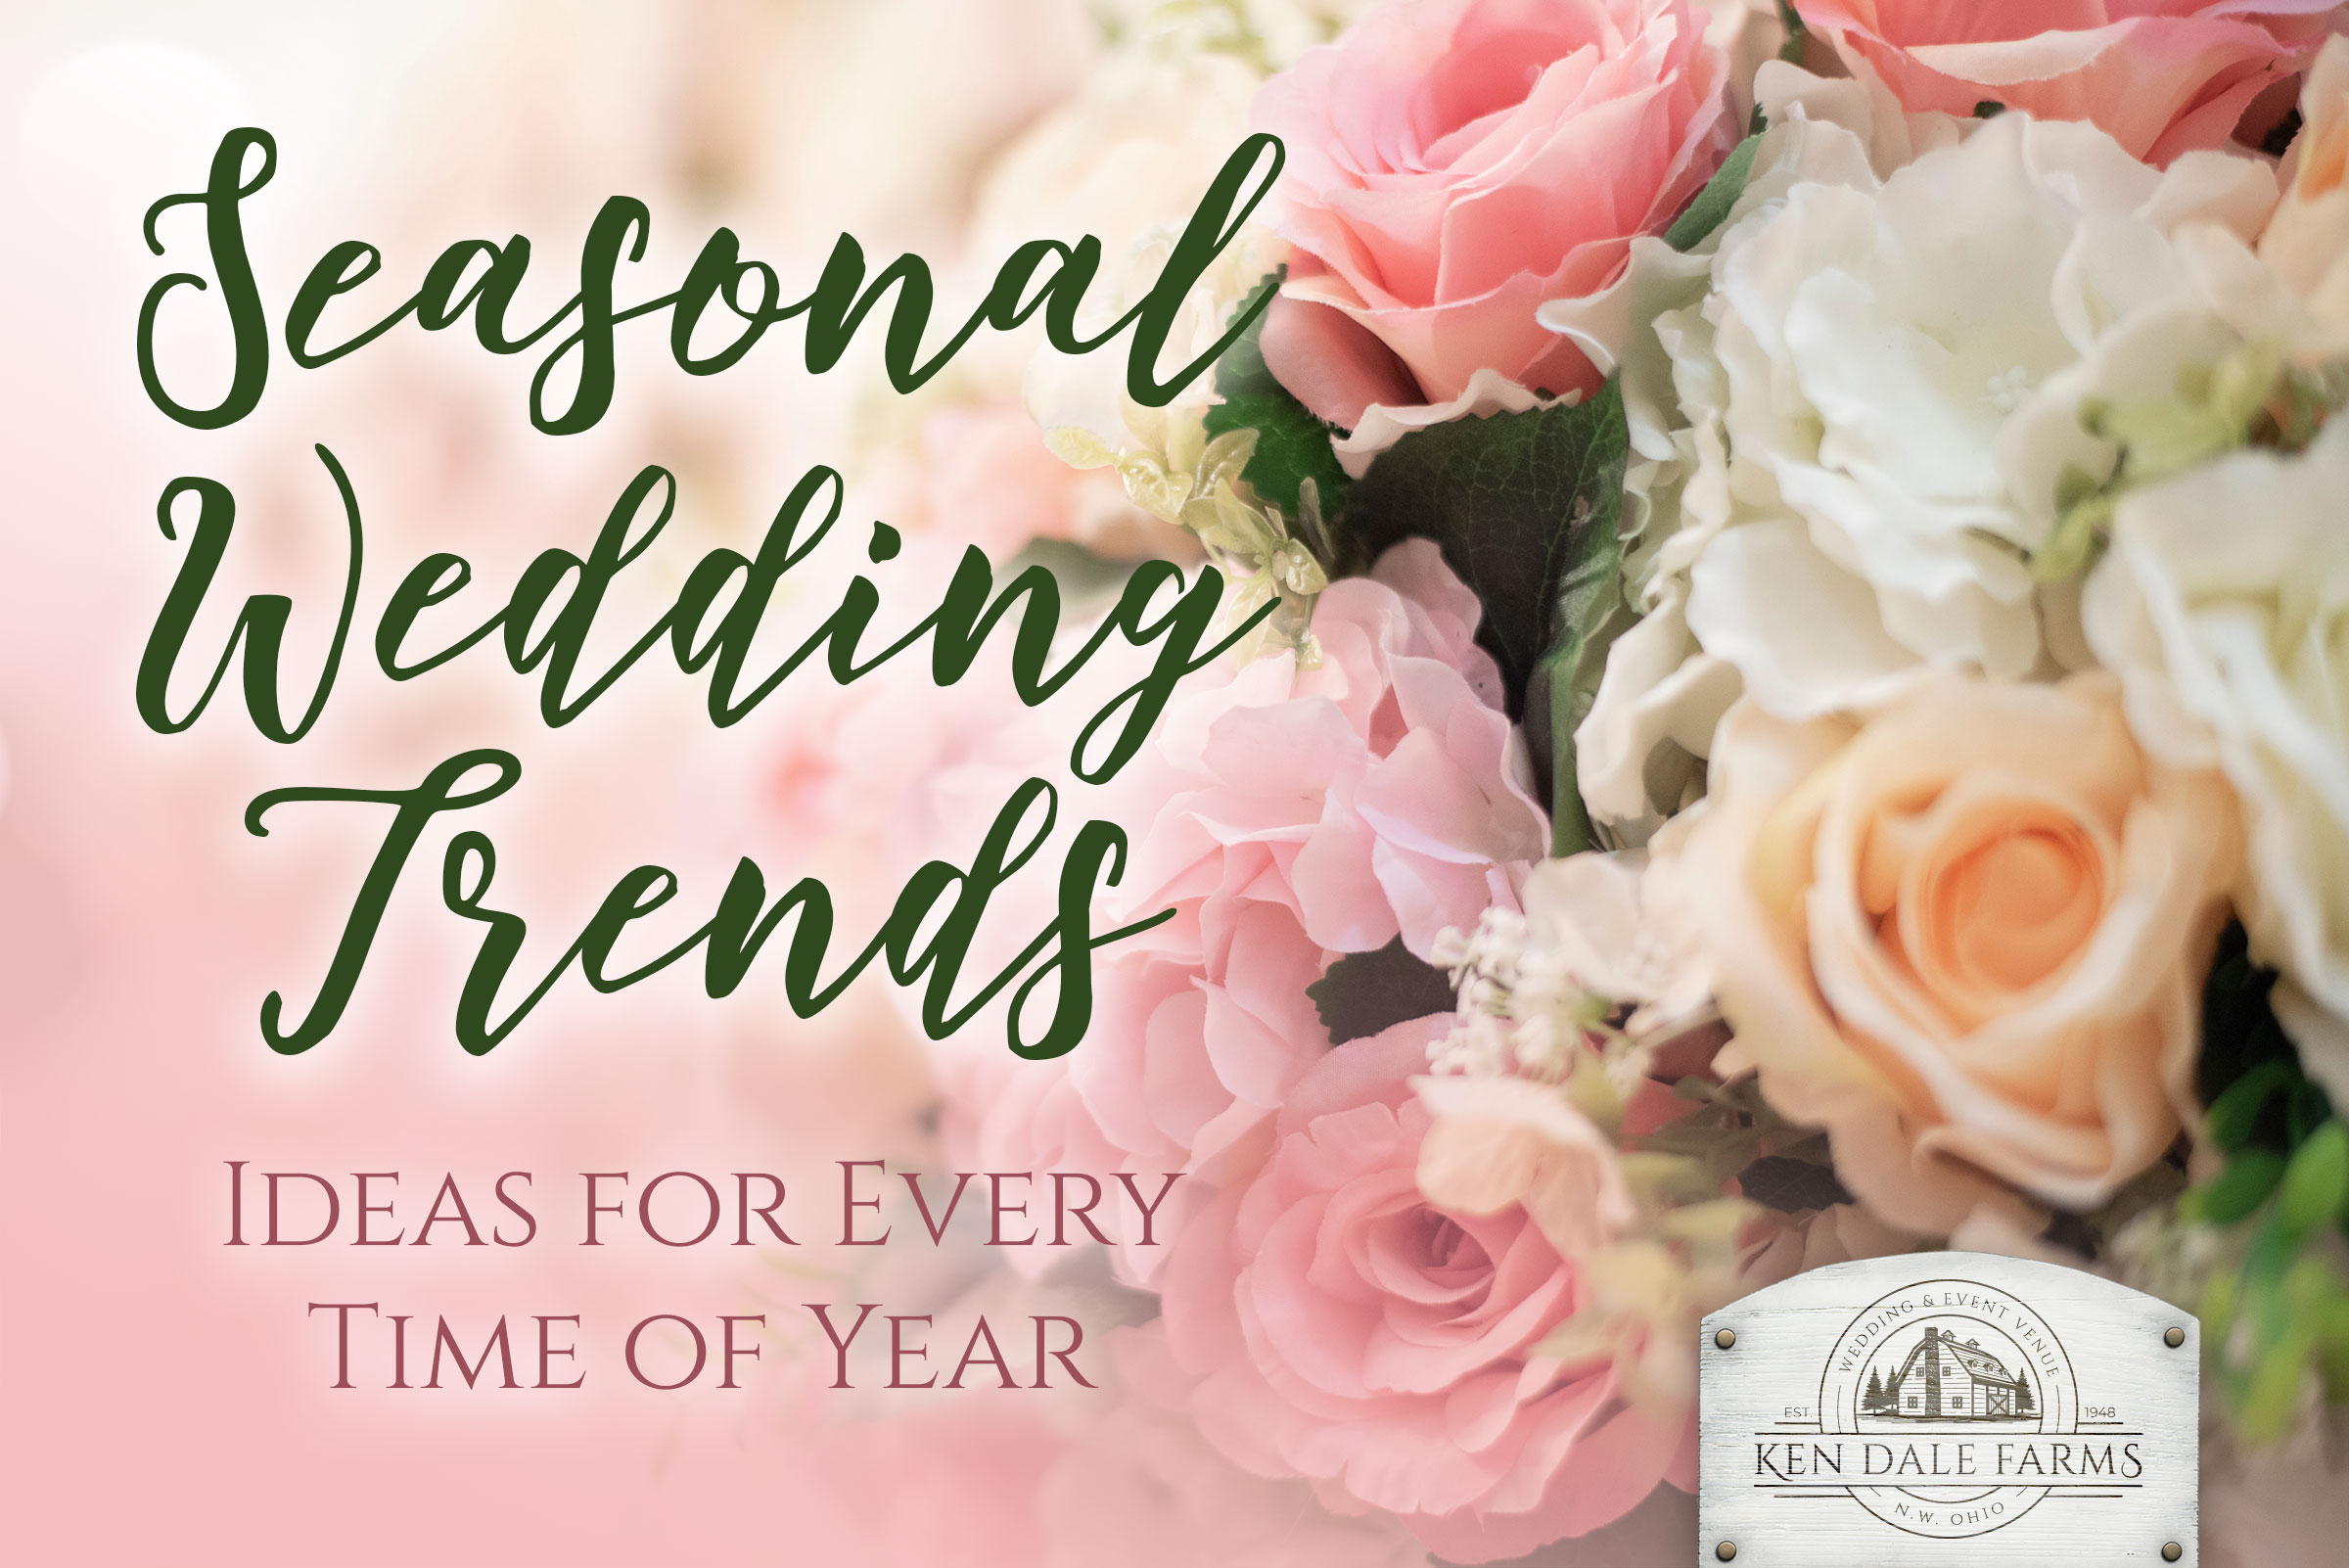 Seasonal Wedding Trends | Ideas for Every Time of Year | Ken Dale Farms